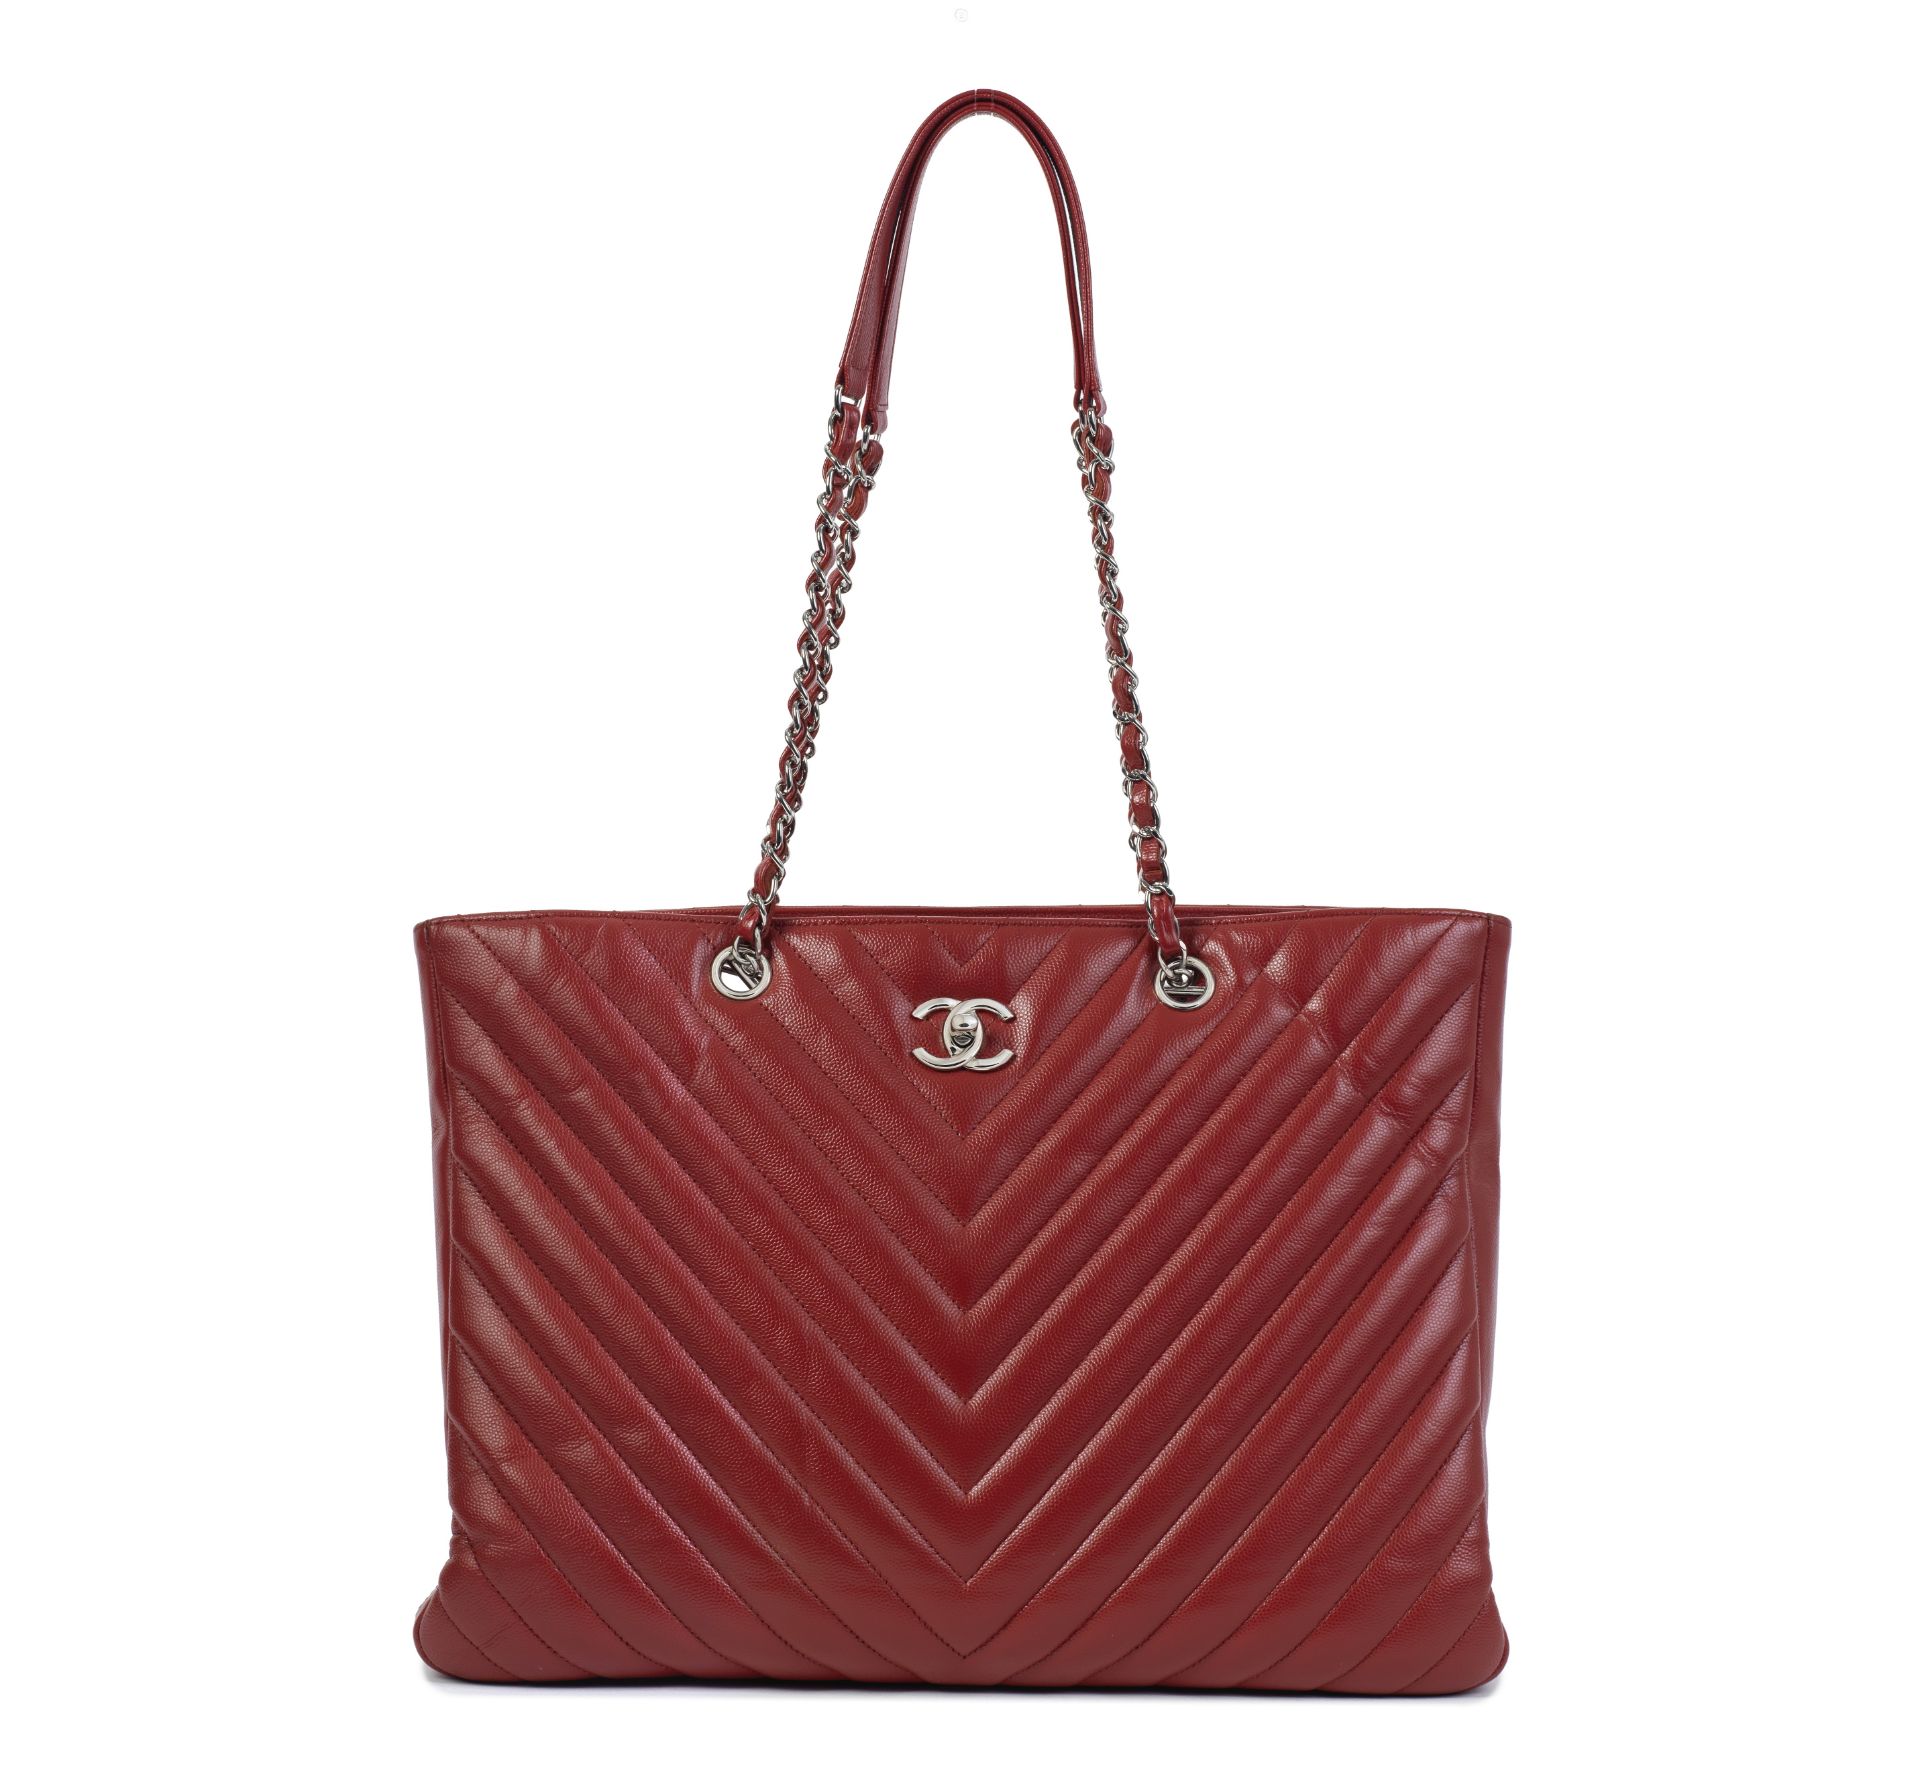 Karl Lagerfeld for Chanel: a Red Caviar Leather Chevron Quilted Shopping Tote 2016 (includes ser...